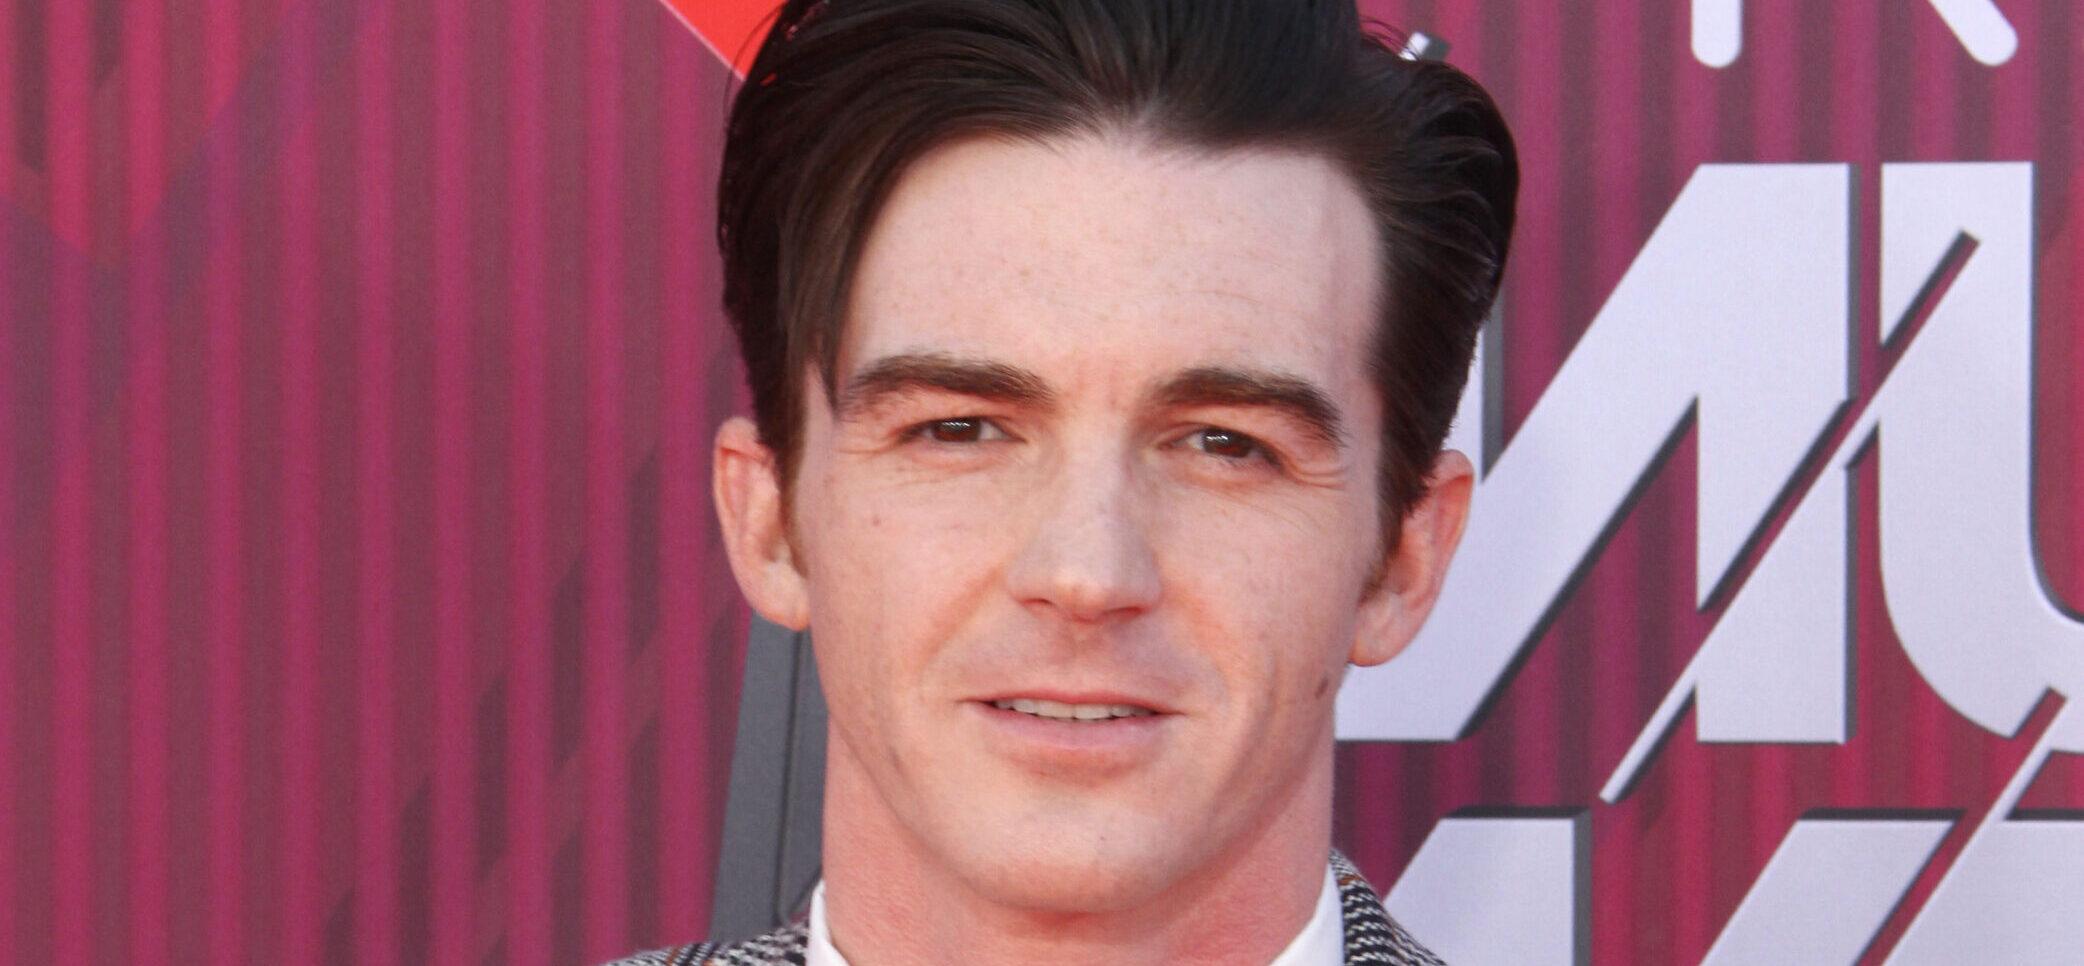 'Come Back Era': Drake Bell's Major Career Move After Brian Peck Abuse Allegations